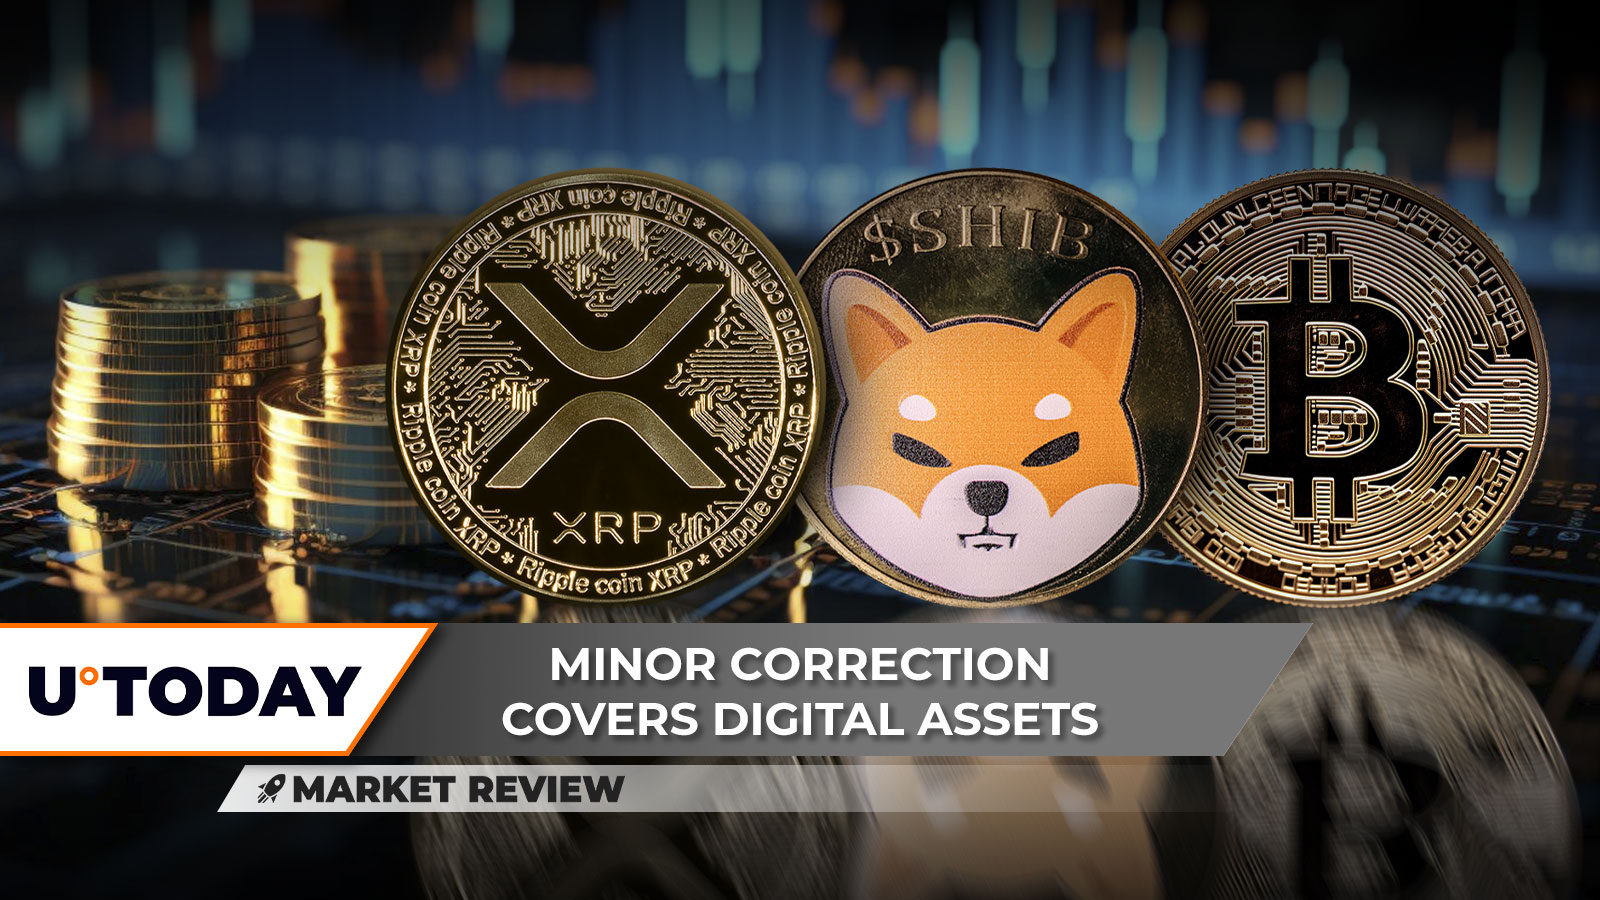 XRP Back to Bottom? Shiba Inu (SHIB) Rally Stops, But There’s Still Hope, Did Bitcoin (BTC) Reach New Top?